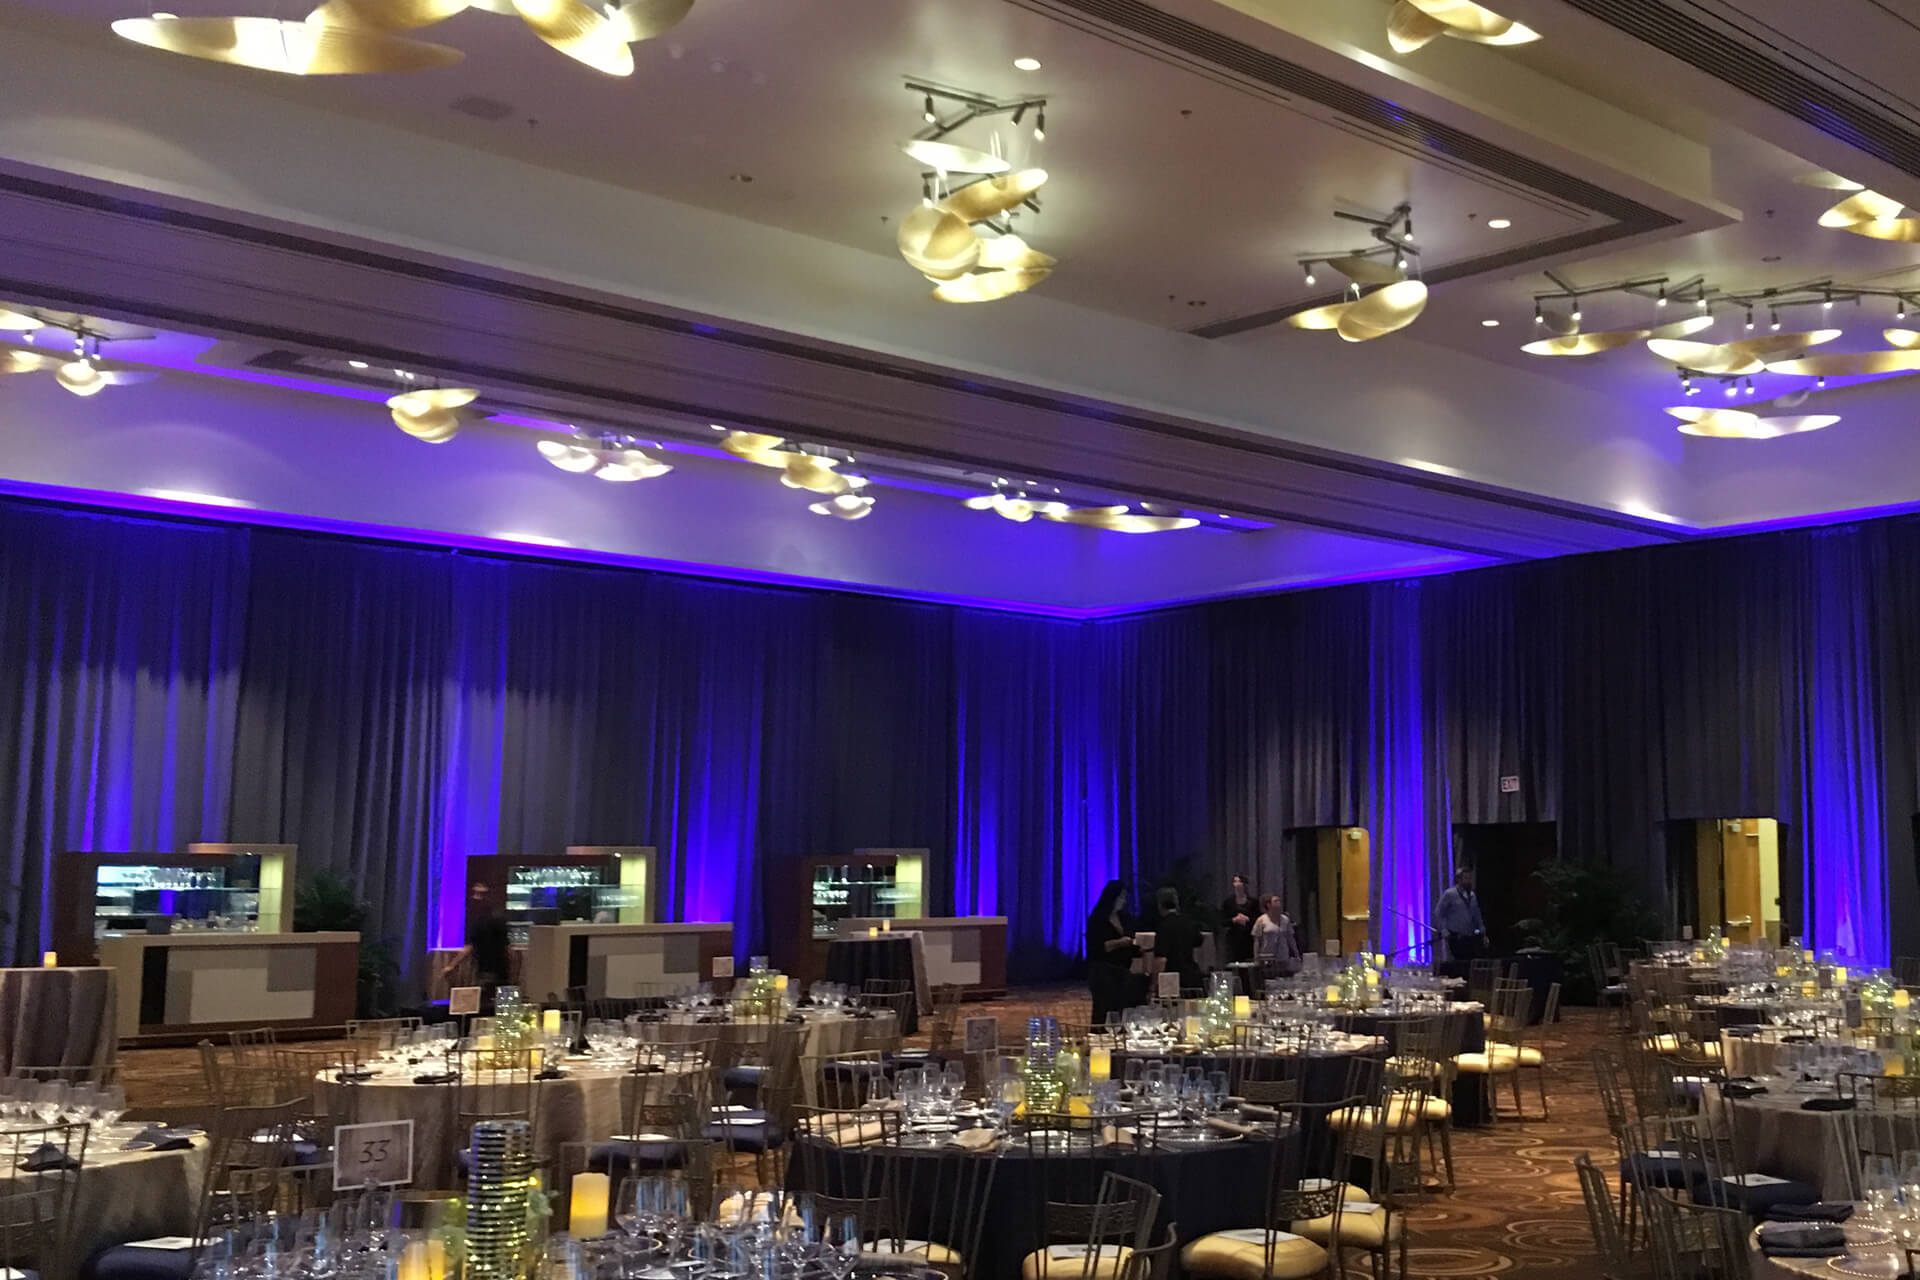 Turn of Events Uplit Room Drapery Event Party Gray Drape with Blue Lights